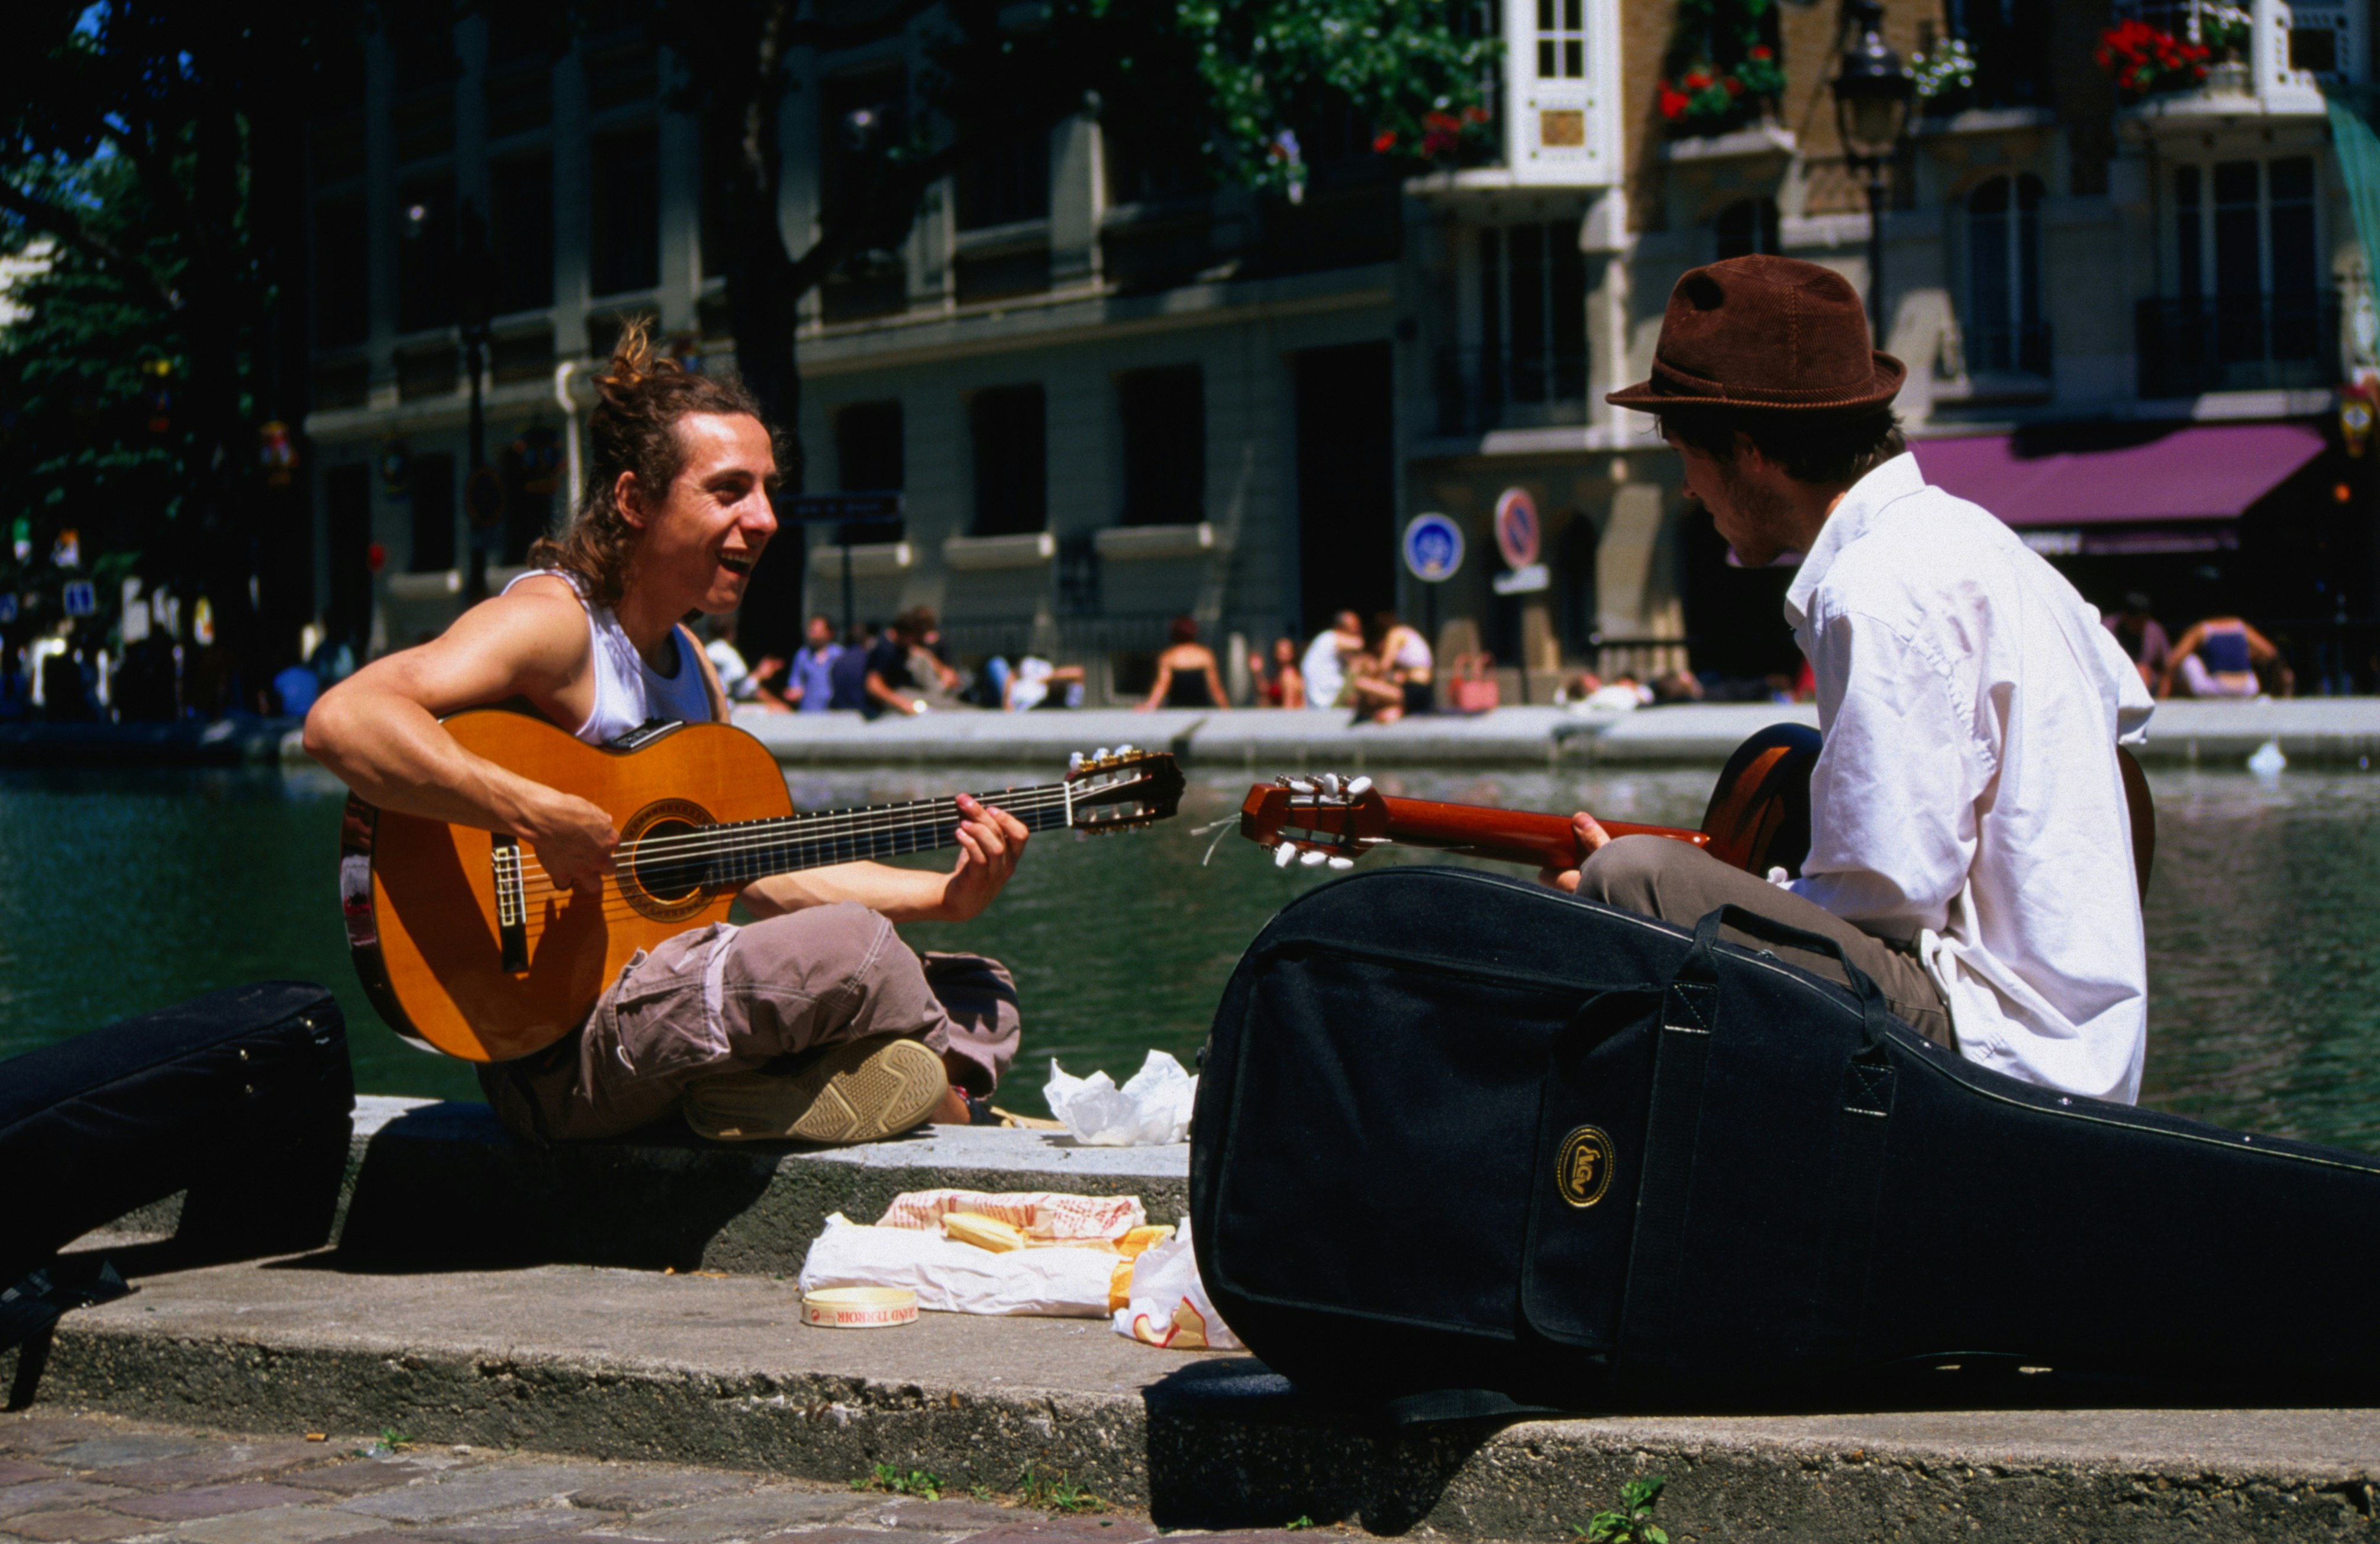 Two men sit on the banks of the canal playing guitars with a picnic of bread, cheese and fruit next to them